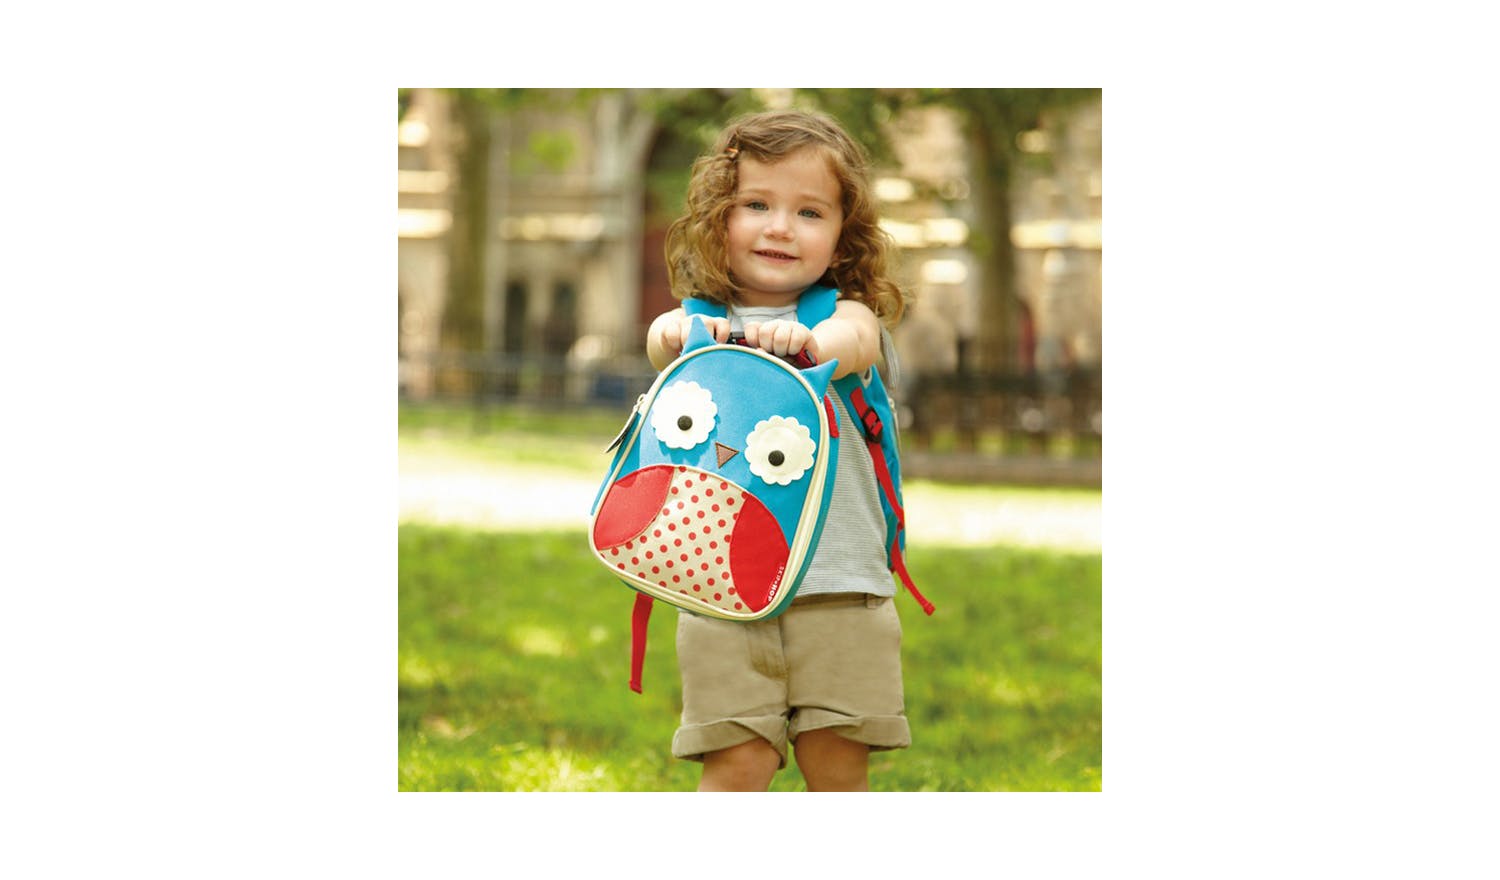 Skip Hop Zoo Lunchie Insulated Kids Lunch Bag - Owl